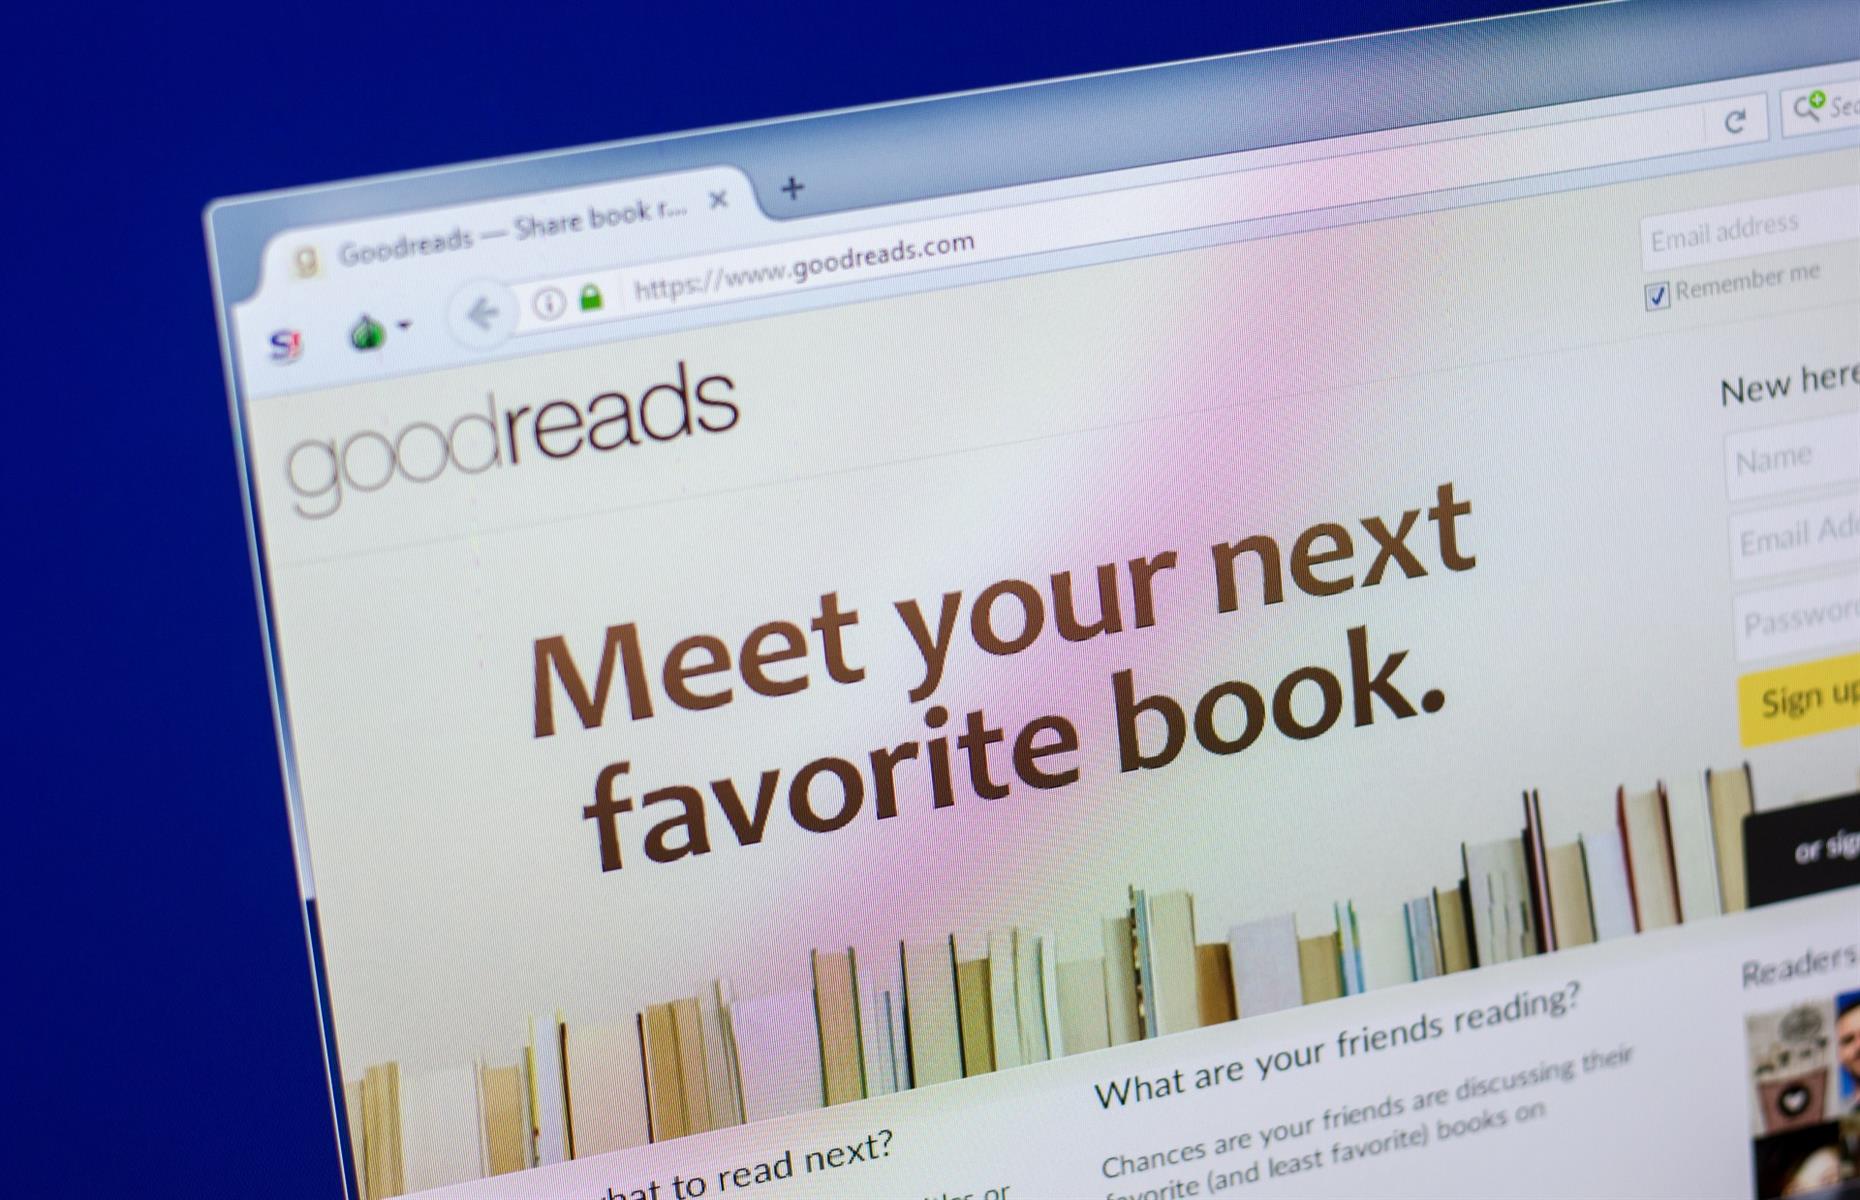 Goodreads: owned by Amazon